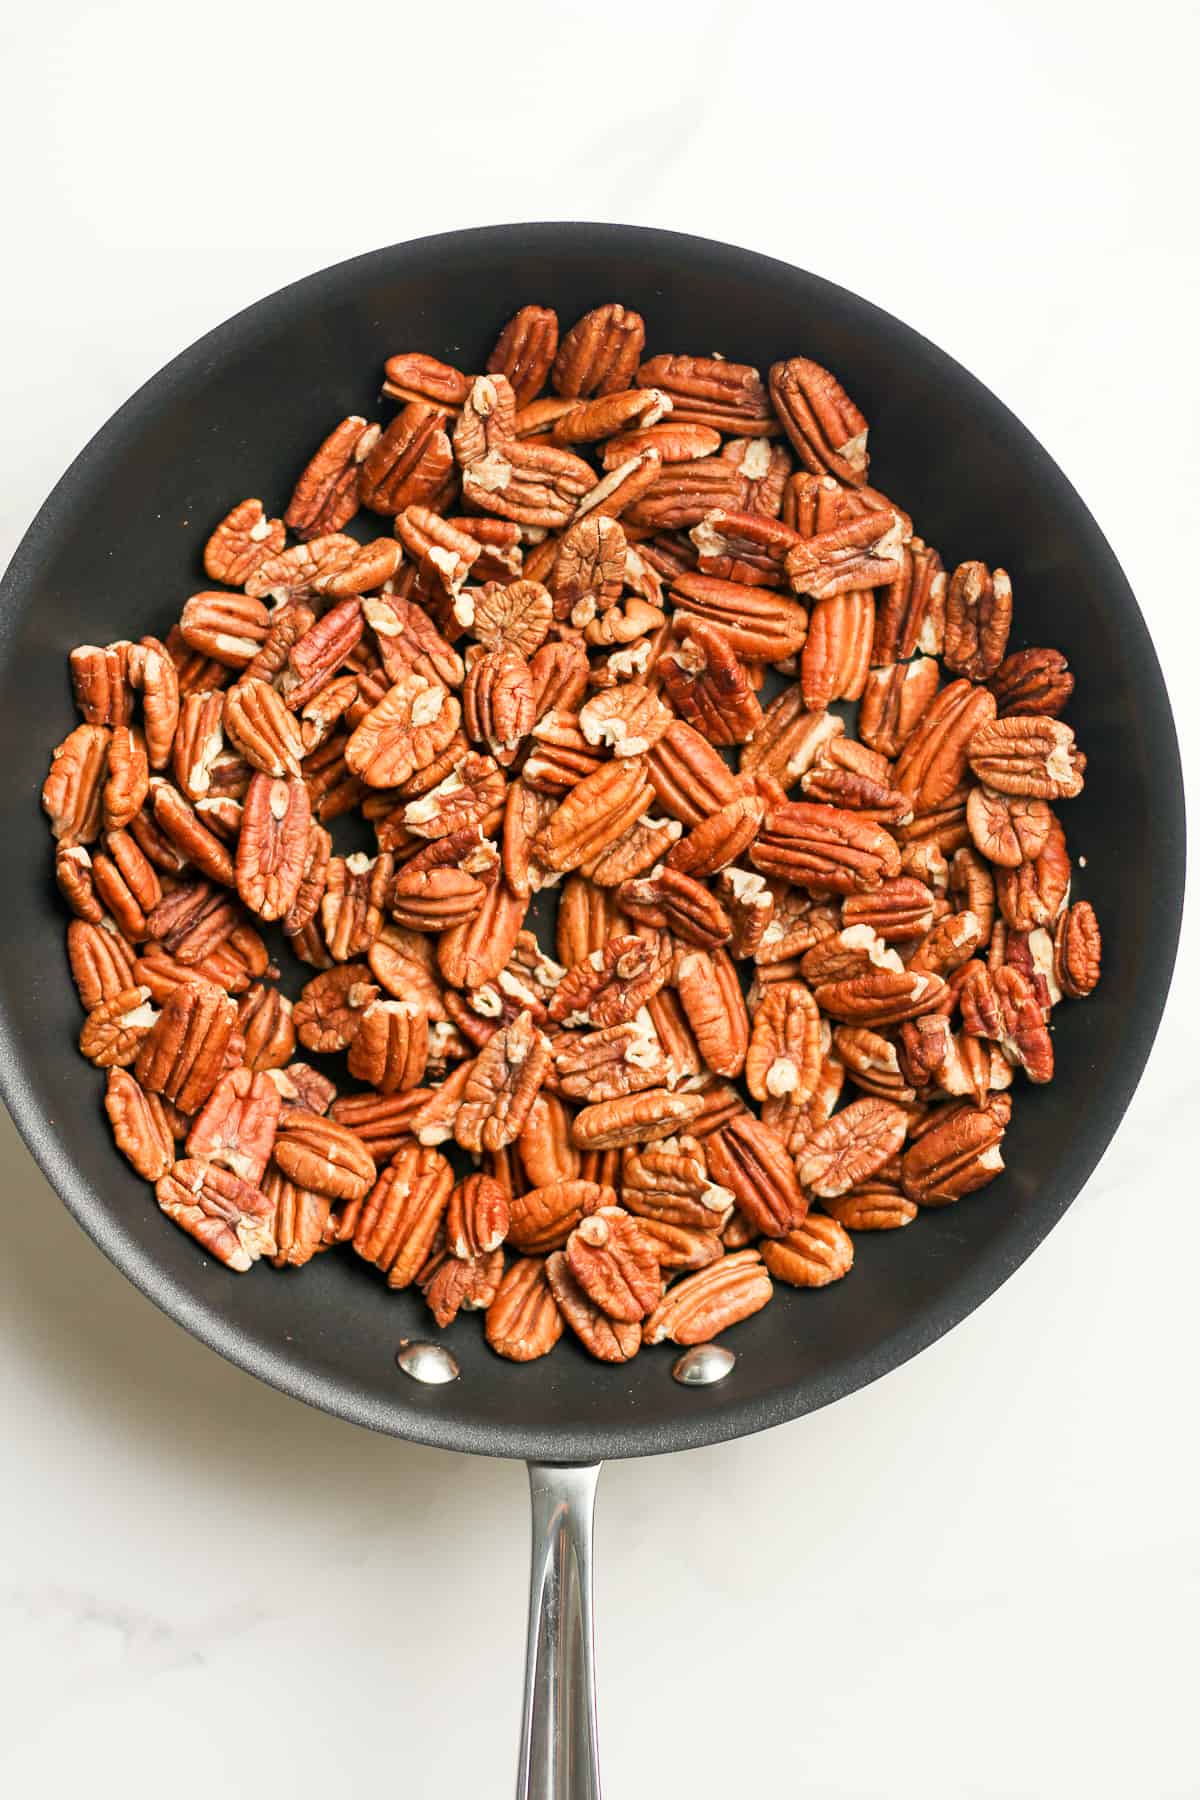 A pan of toasted pecans.